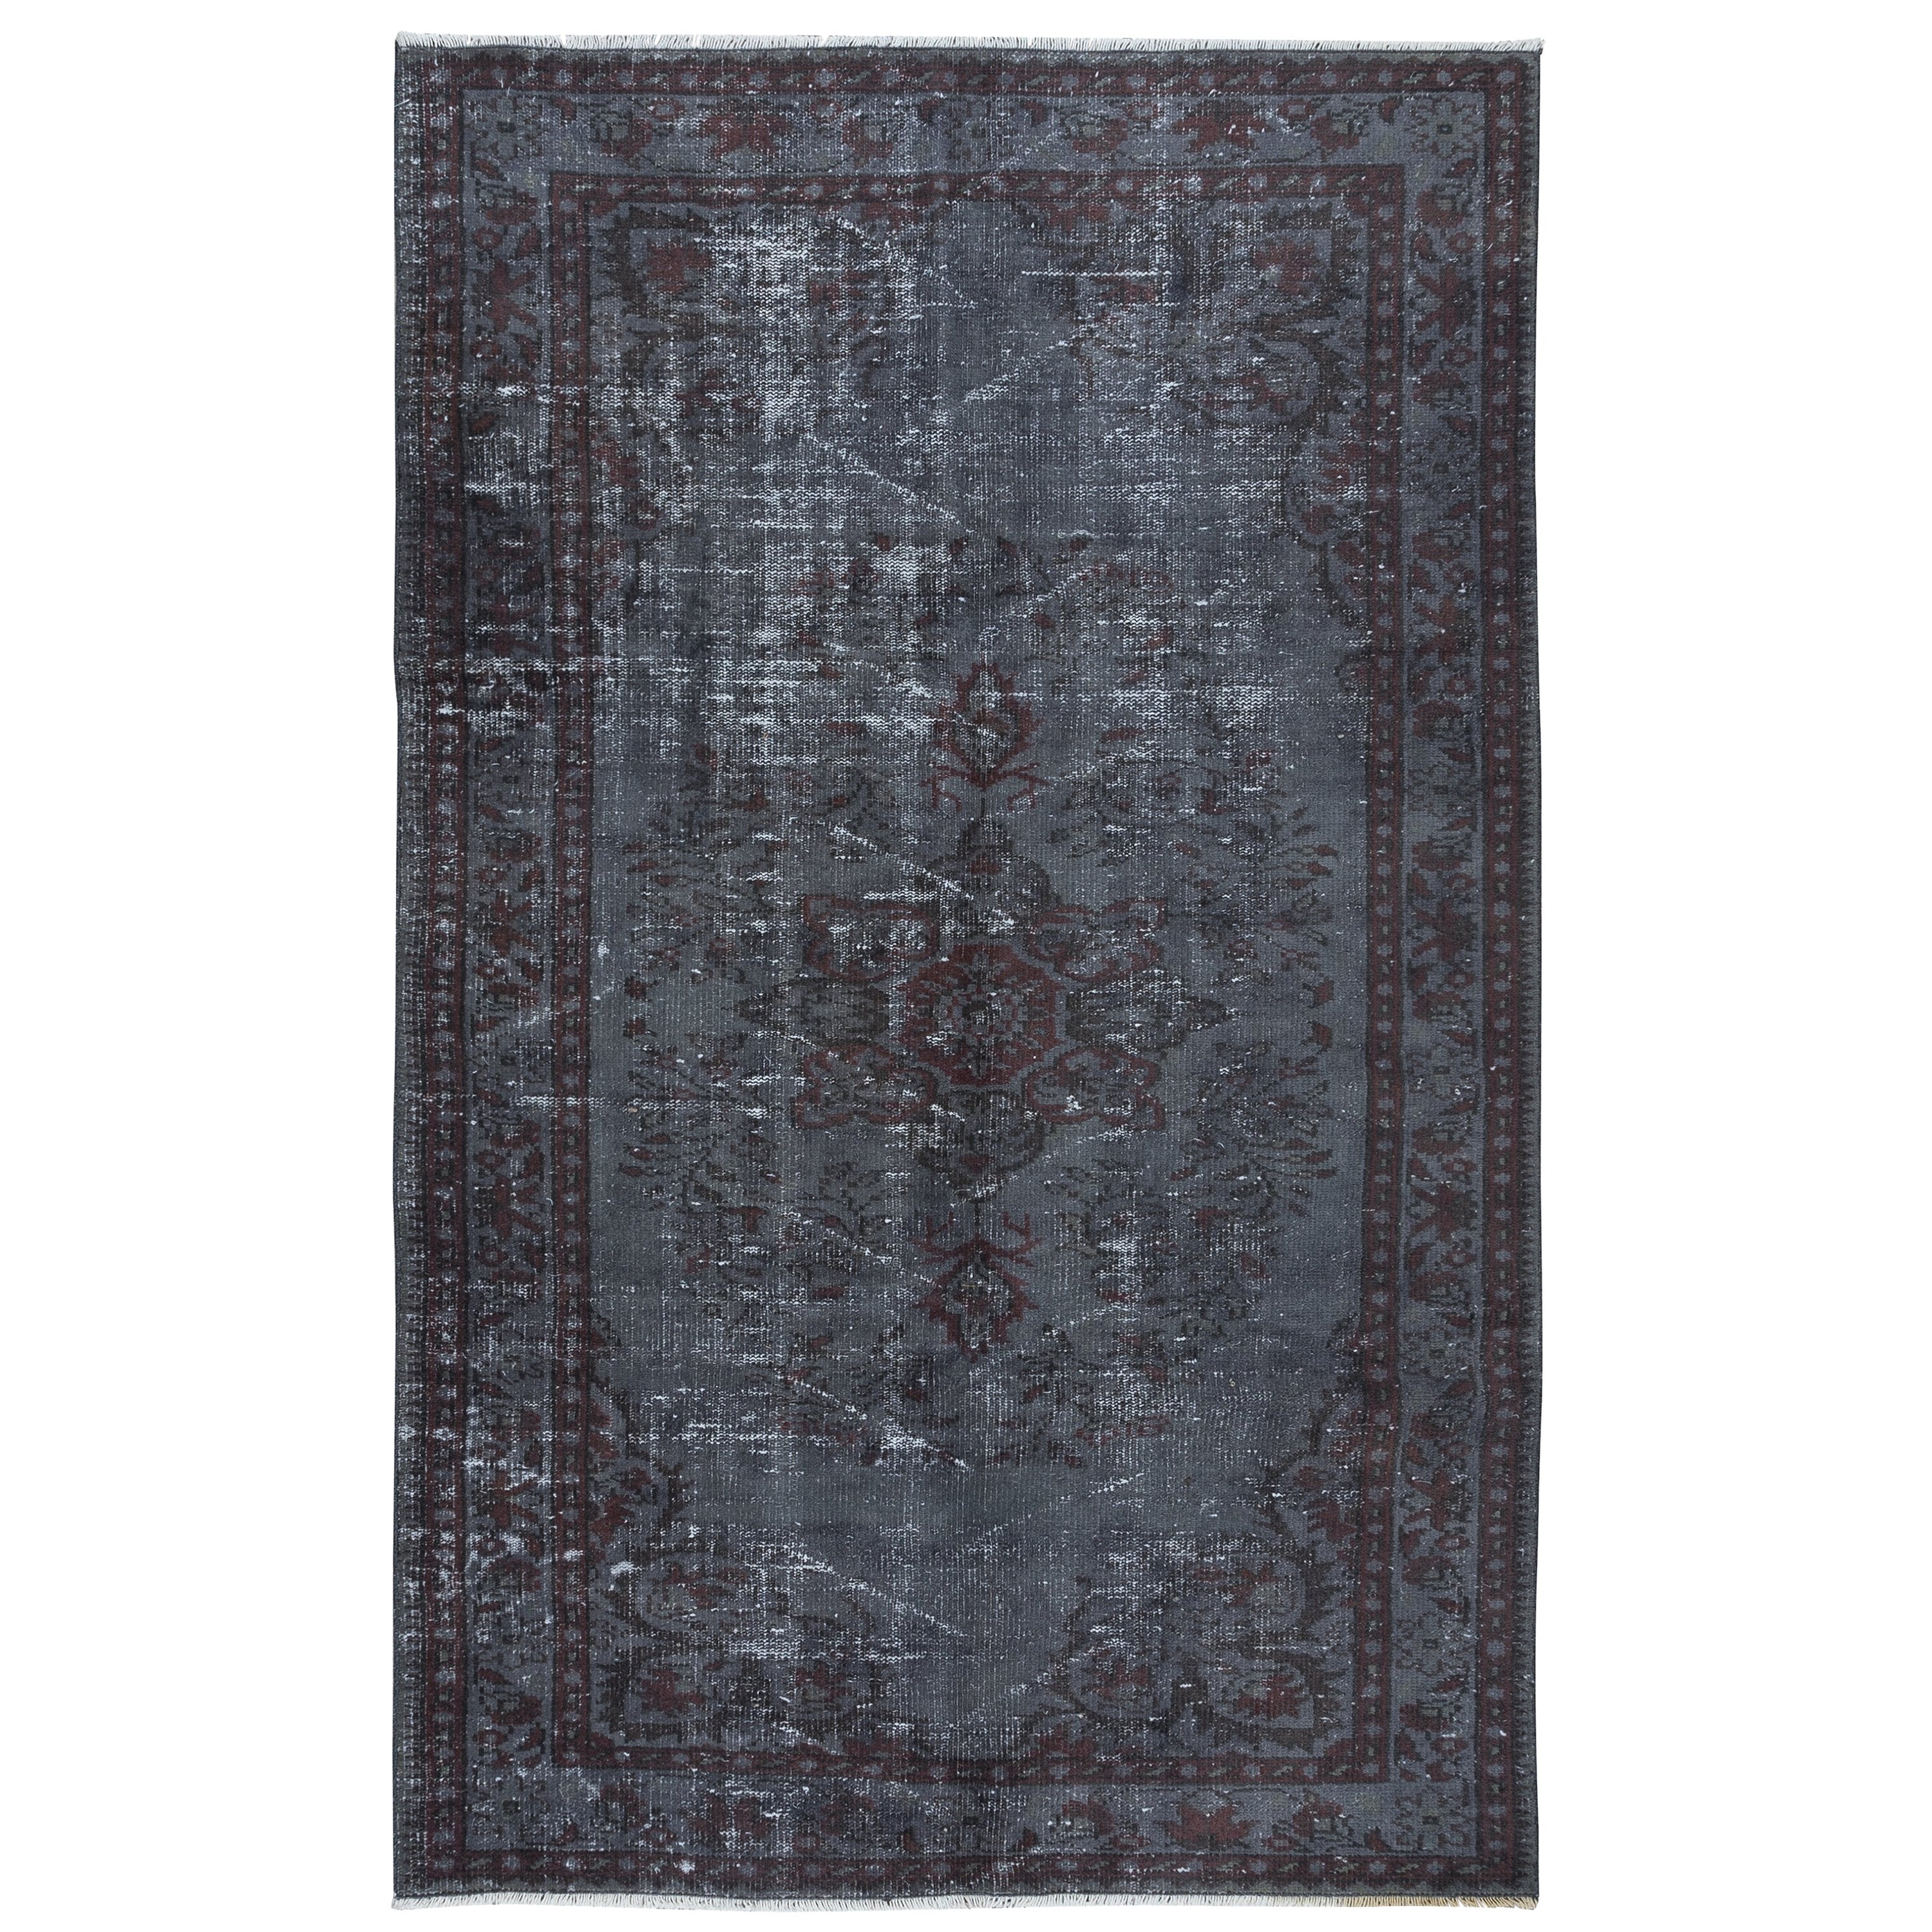 5.4x8.4 Ft Modern Handmade Turkish Area Rug in Maroon Red & Gray for Living Room